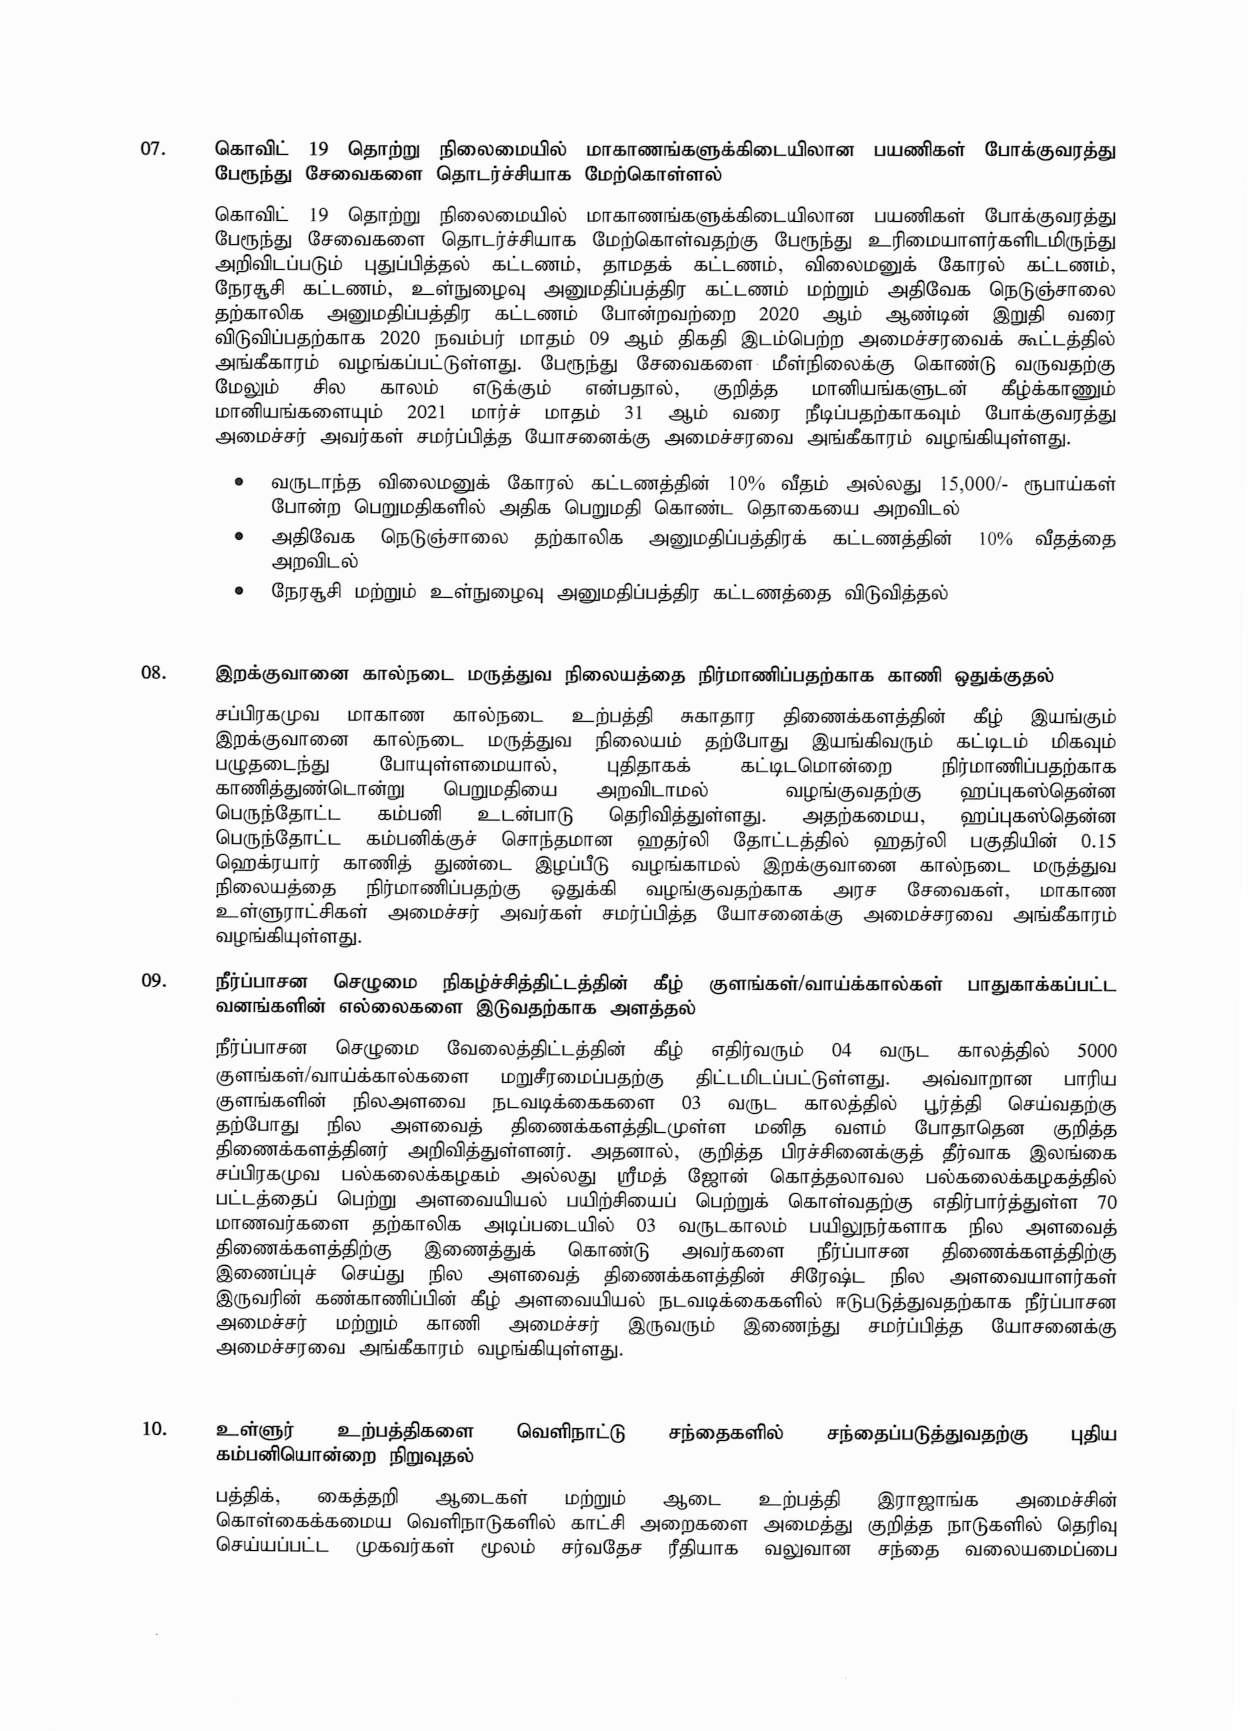 Cabinet Decision on 08.03.2021 Tamil page 003